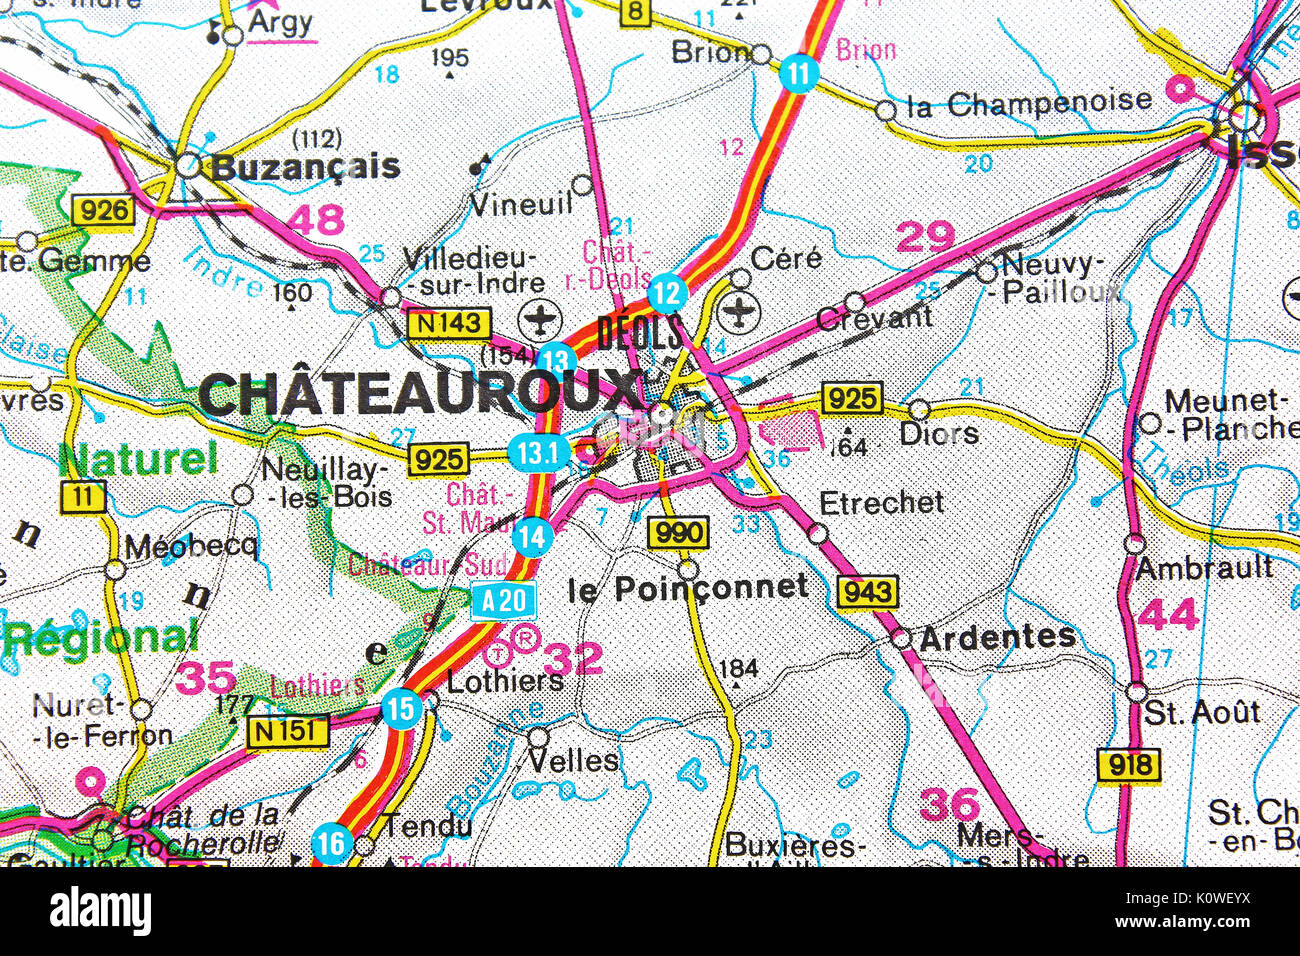 itineraire chateauroux tours